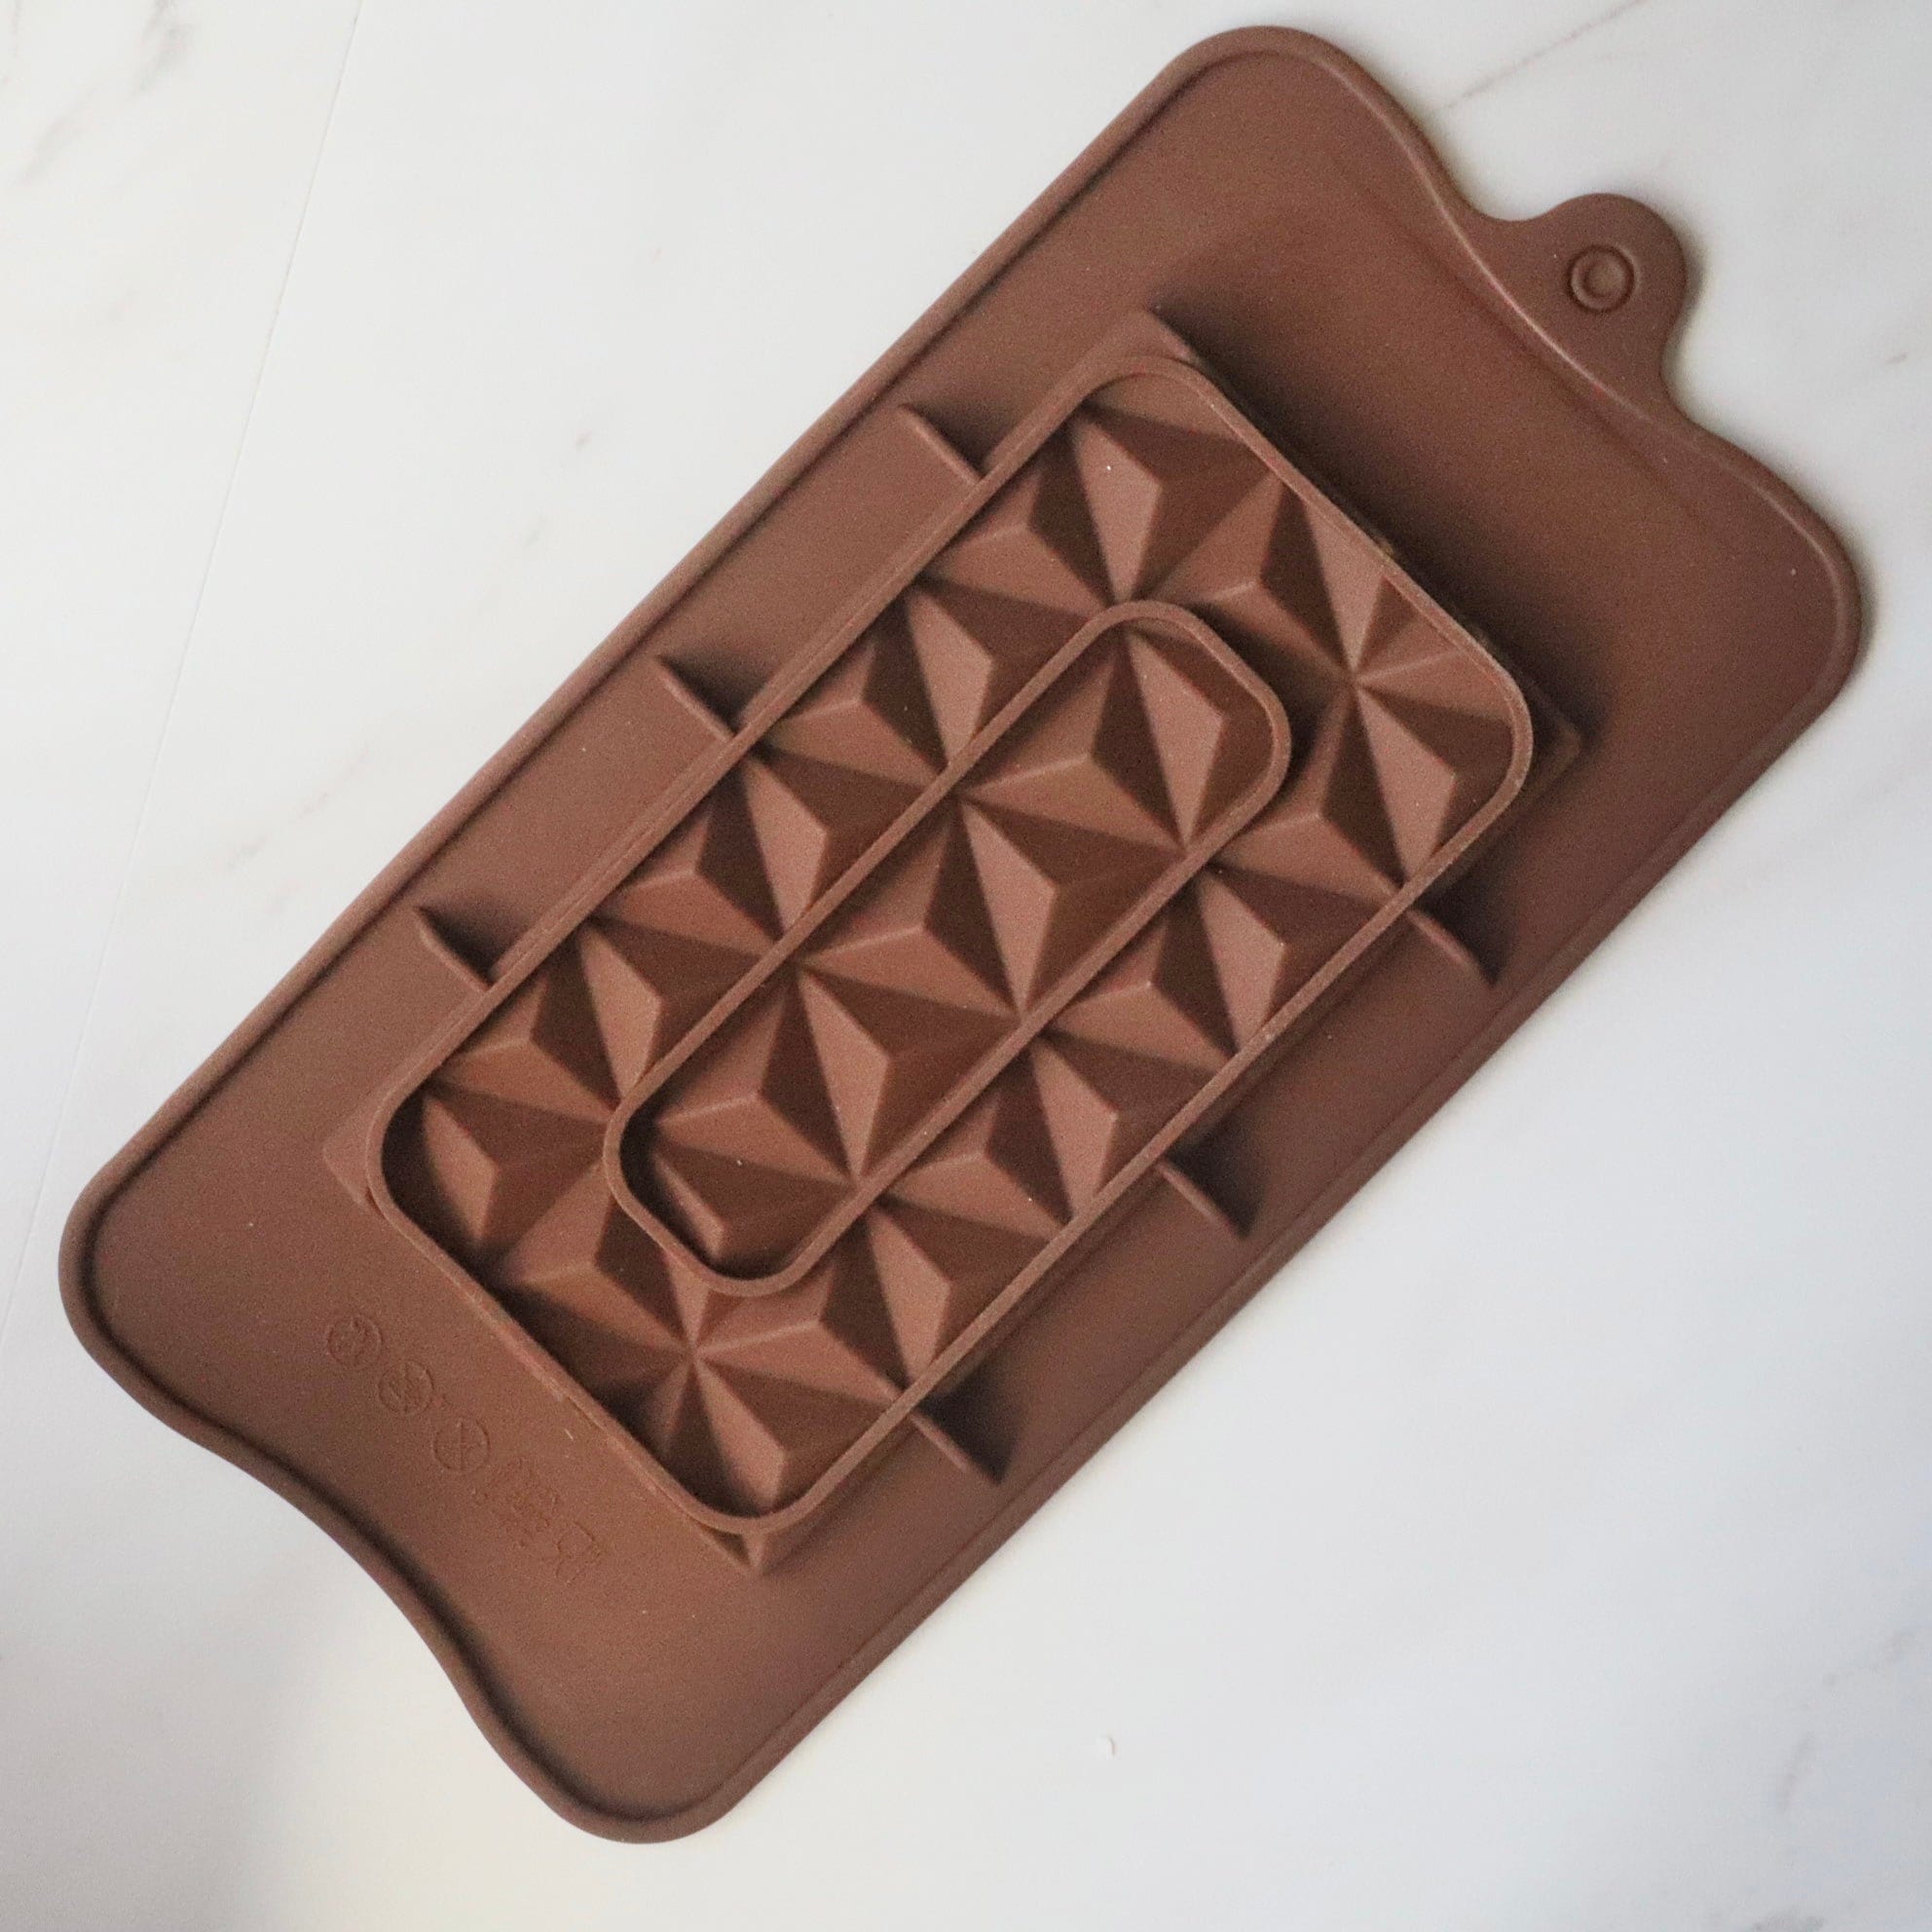 Chocolate Bar Molds Silicone Many Designs to Choose From 